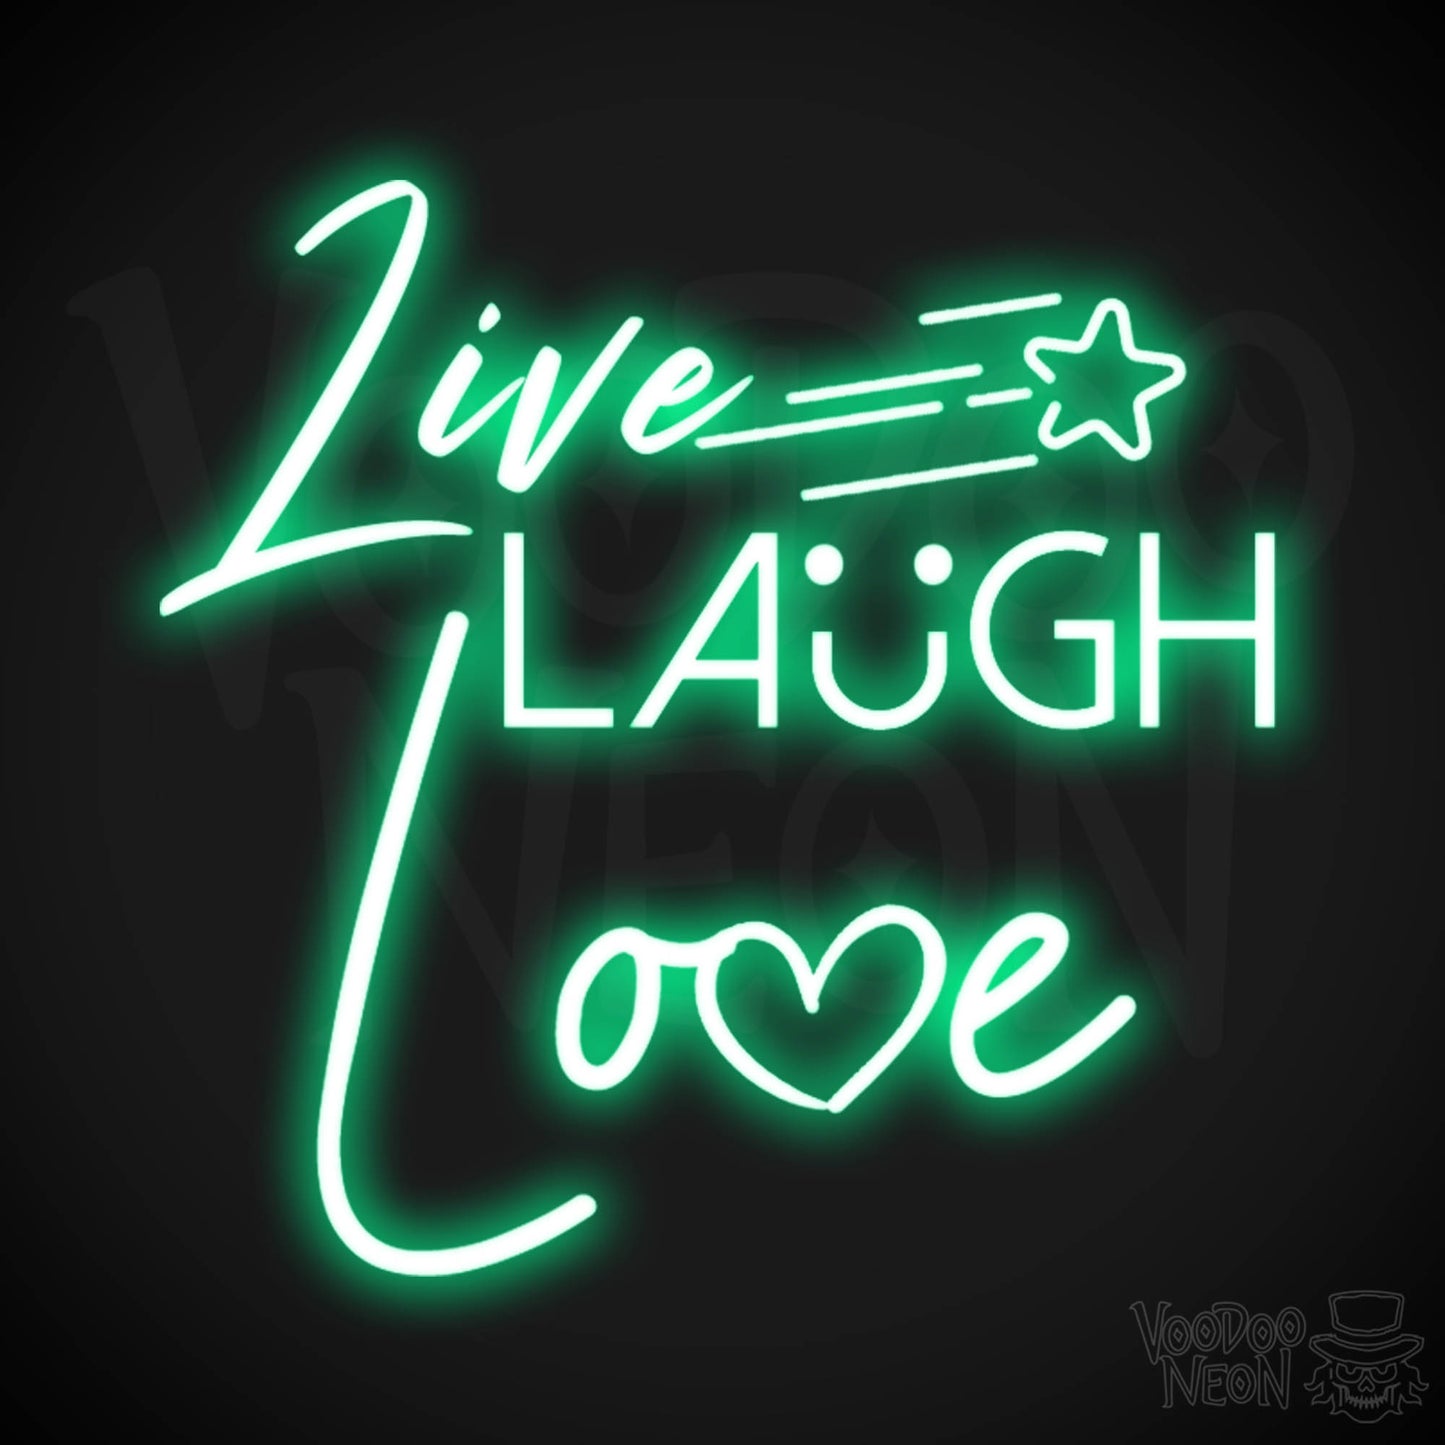 Live Laugh Love Neon Sign - Neon Live Laugh Love Sign - Wall Art - Color Green